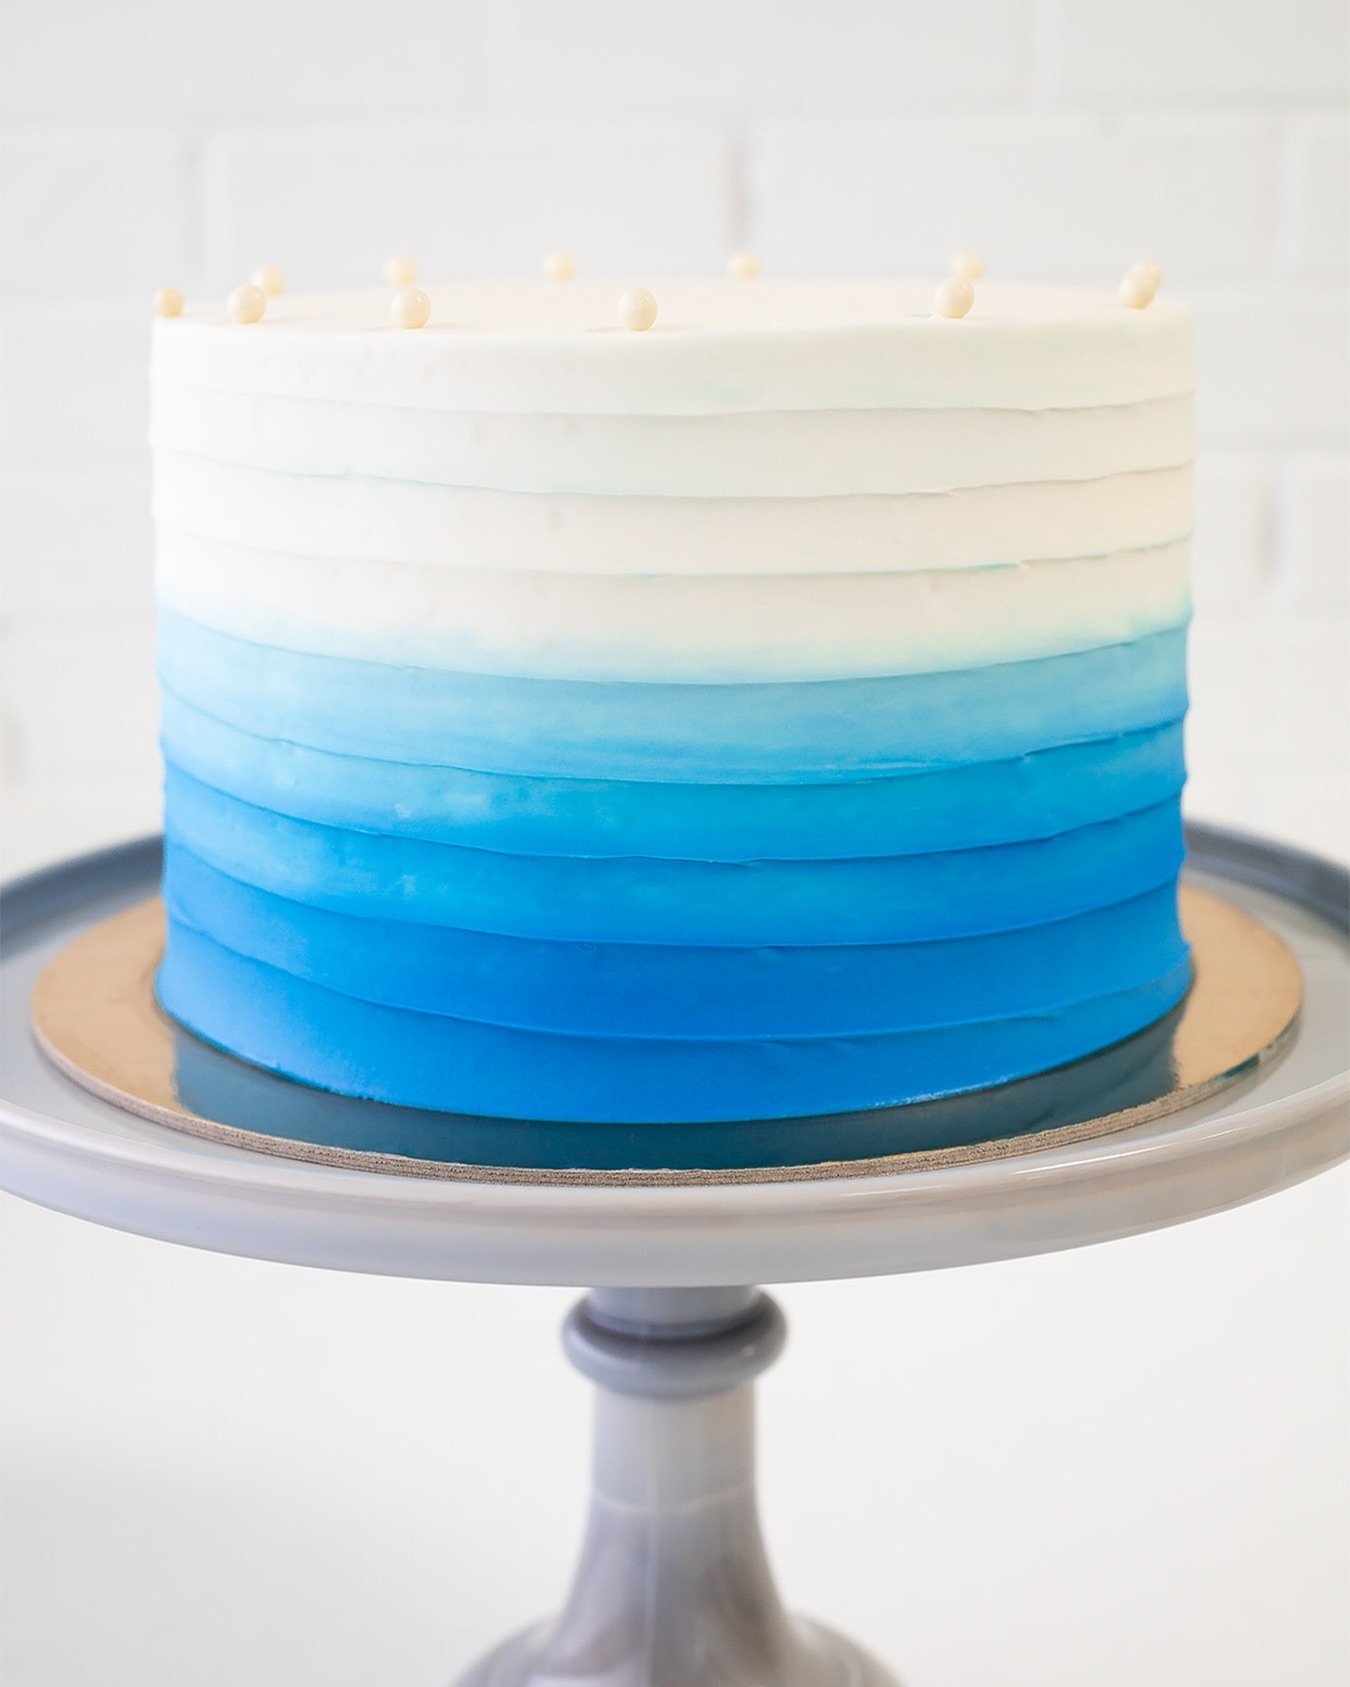 8&rdquo; Spatula Sides Cake in Medium Blue-to-White ombr&eacute; 💙🤍🎂 Customize your next Made-to-Order Cake with your choice of size, flavor, design, and color(s) at the bio link.